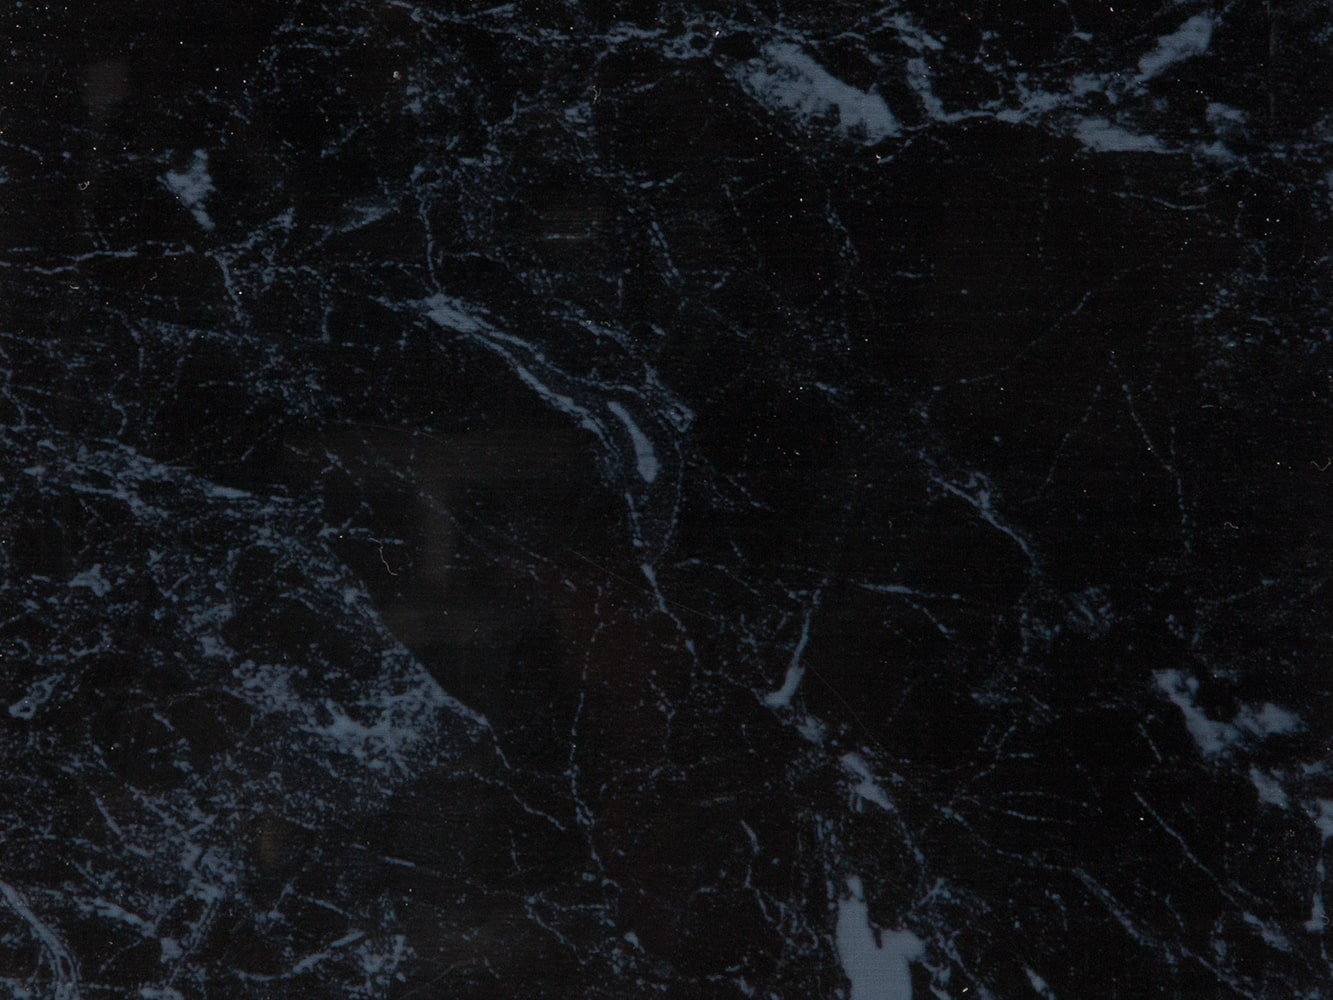 Wet Wall Acrylic Shower Panel 1000mm x 2400mm Black Marble